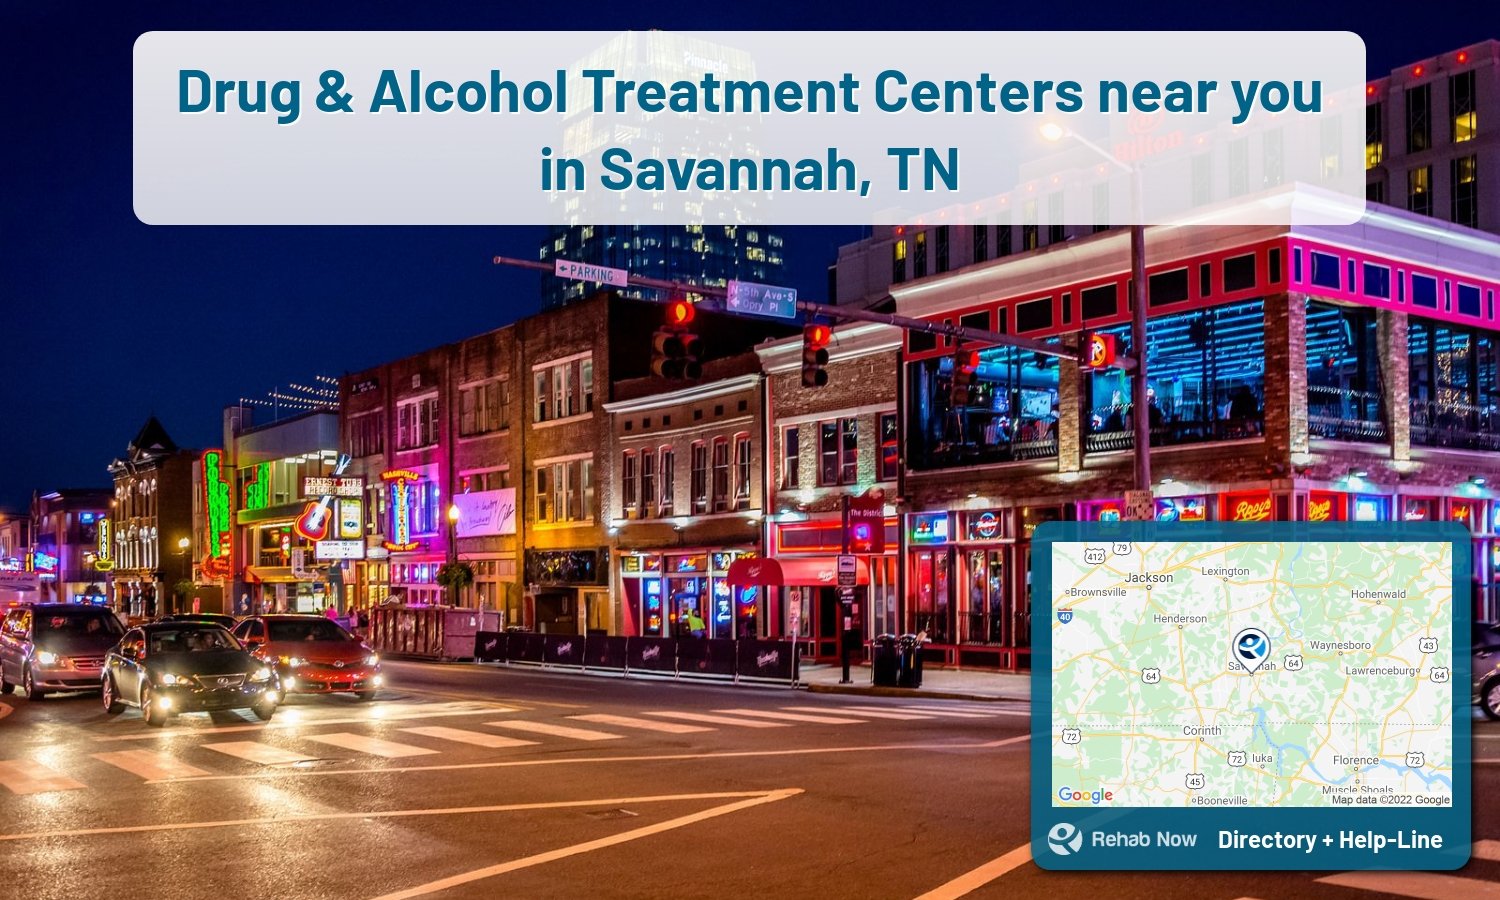 Ready to pick a rehab center in Savannah? Get off alcohol, opiates, and other drugs, by selecting top drug rehab centers in Tennessee